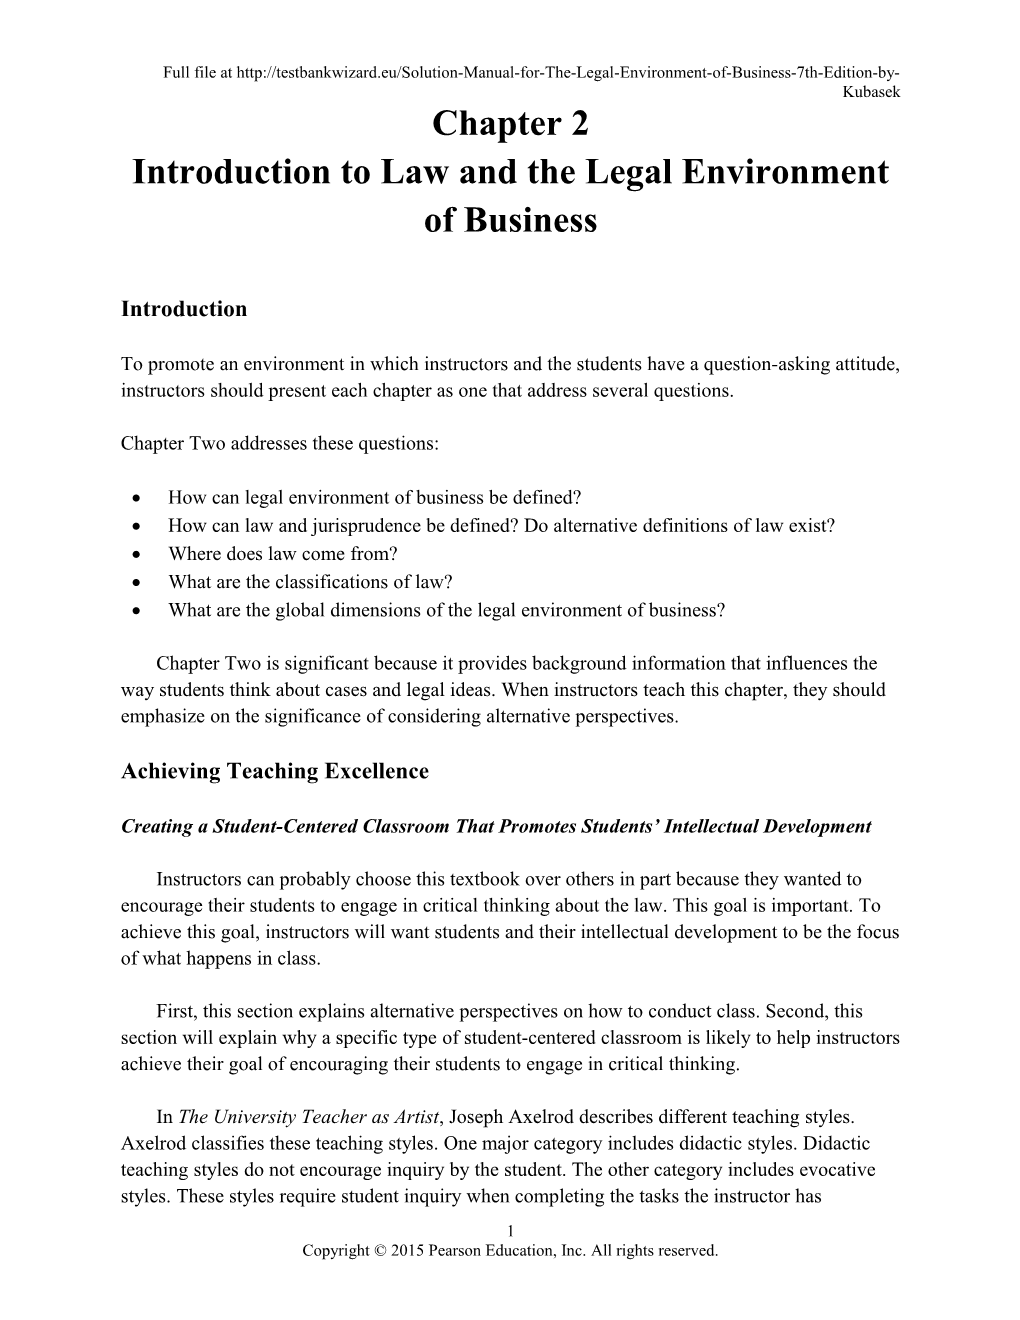 Chapter Two: Introduction to Law and the Legal Environment of Business